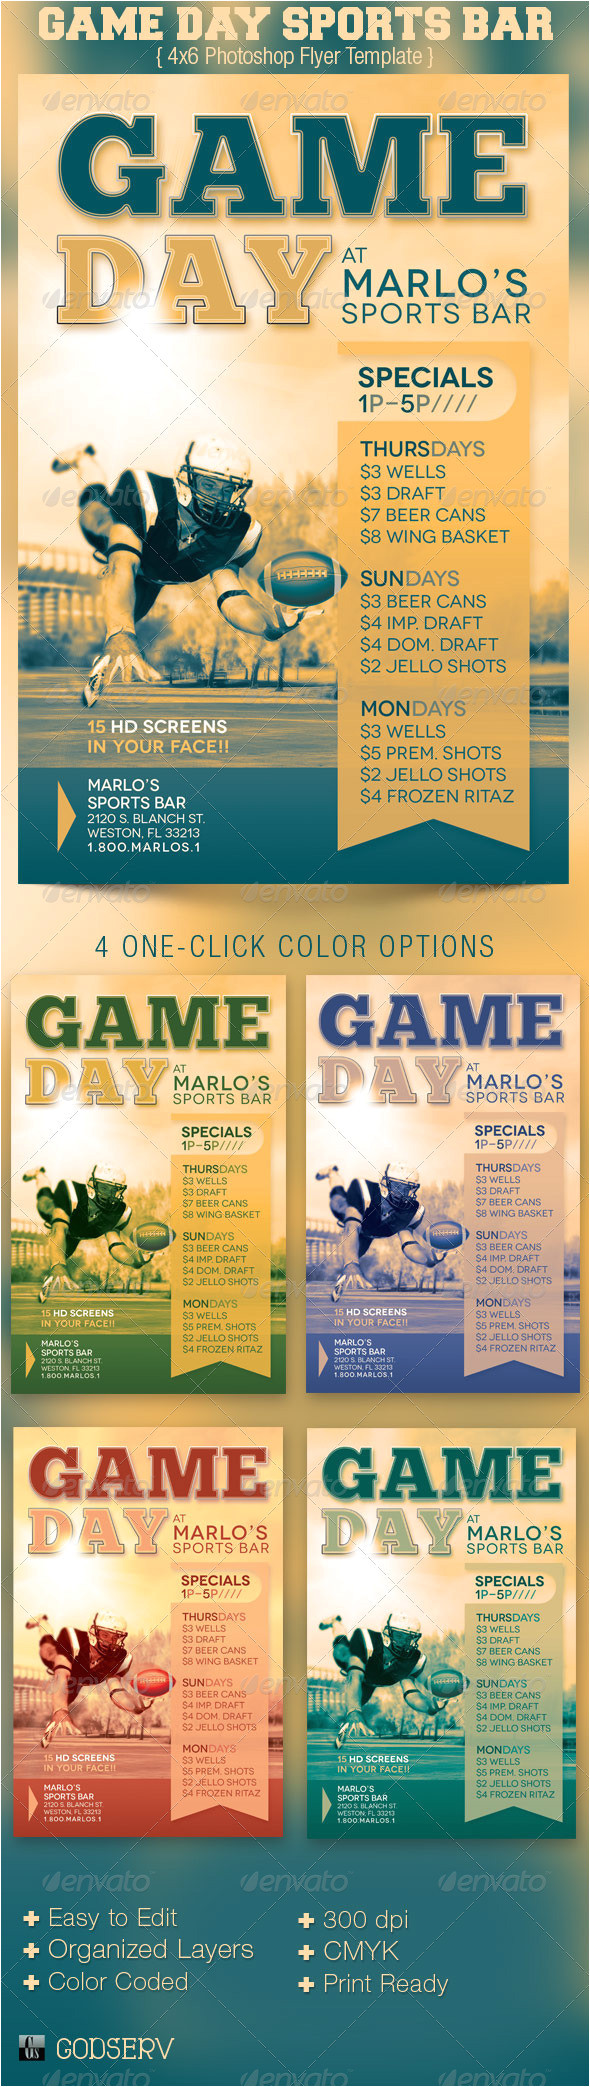 game day sports bar flyer template